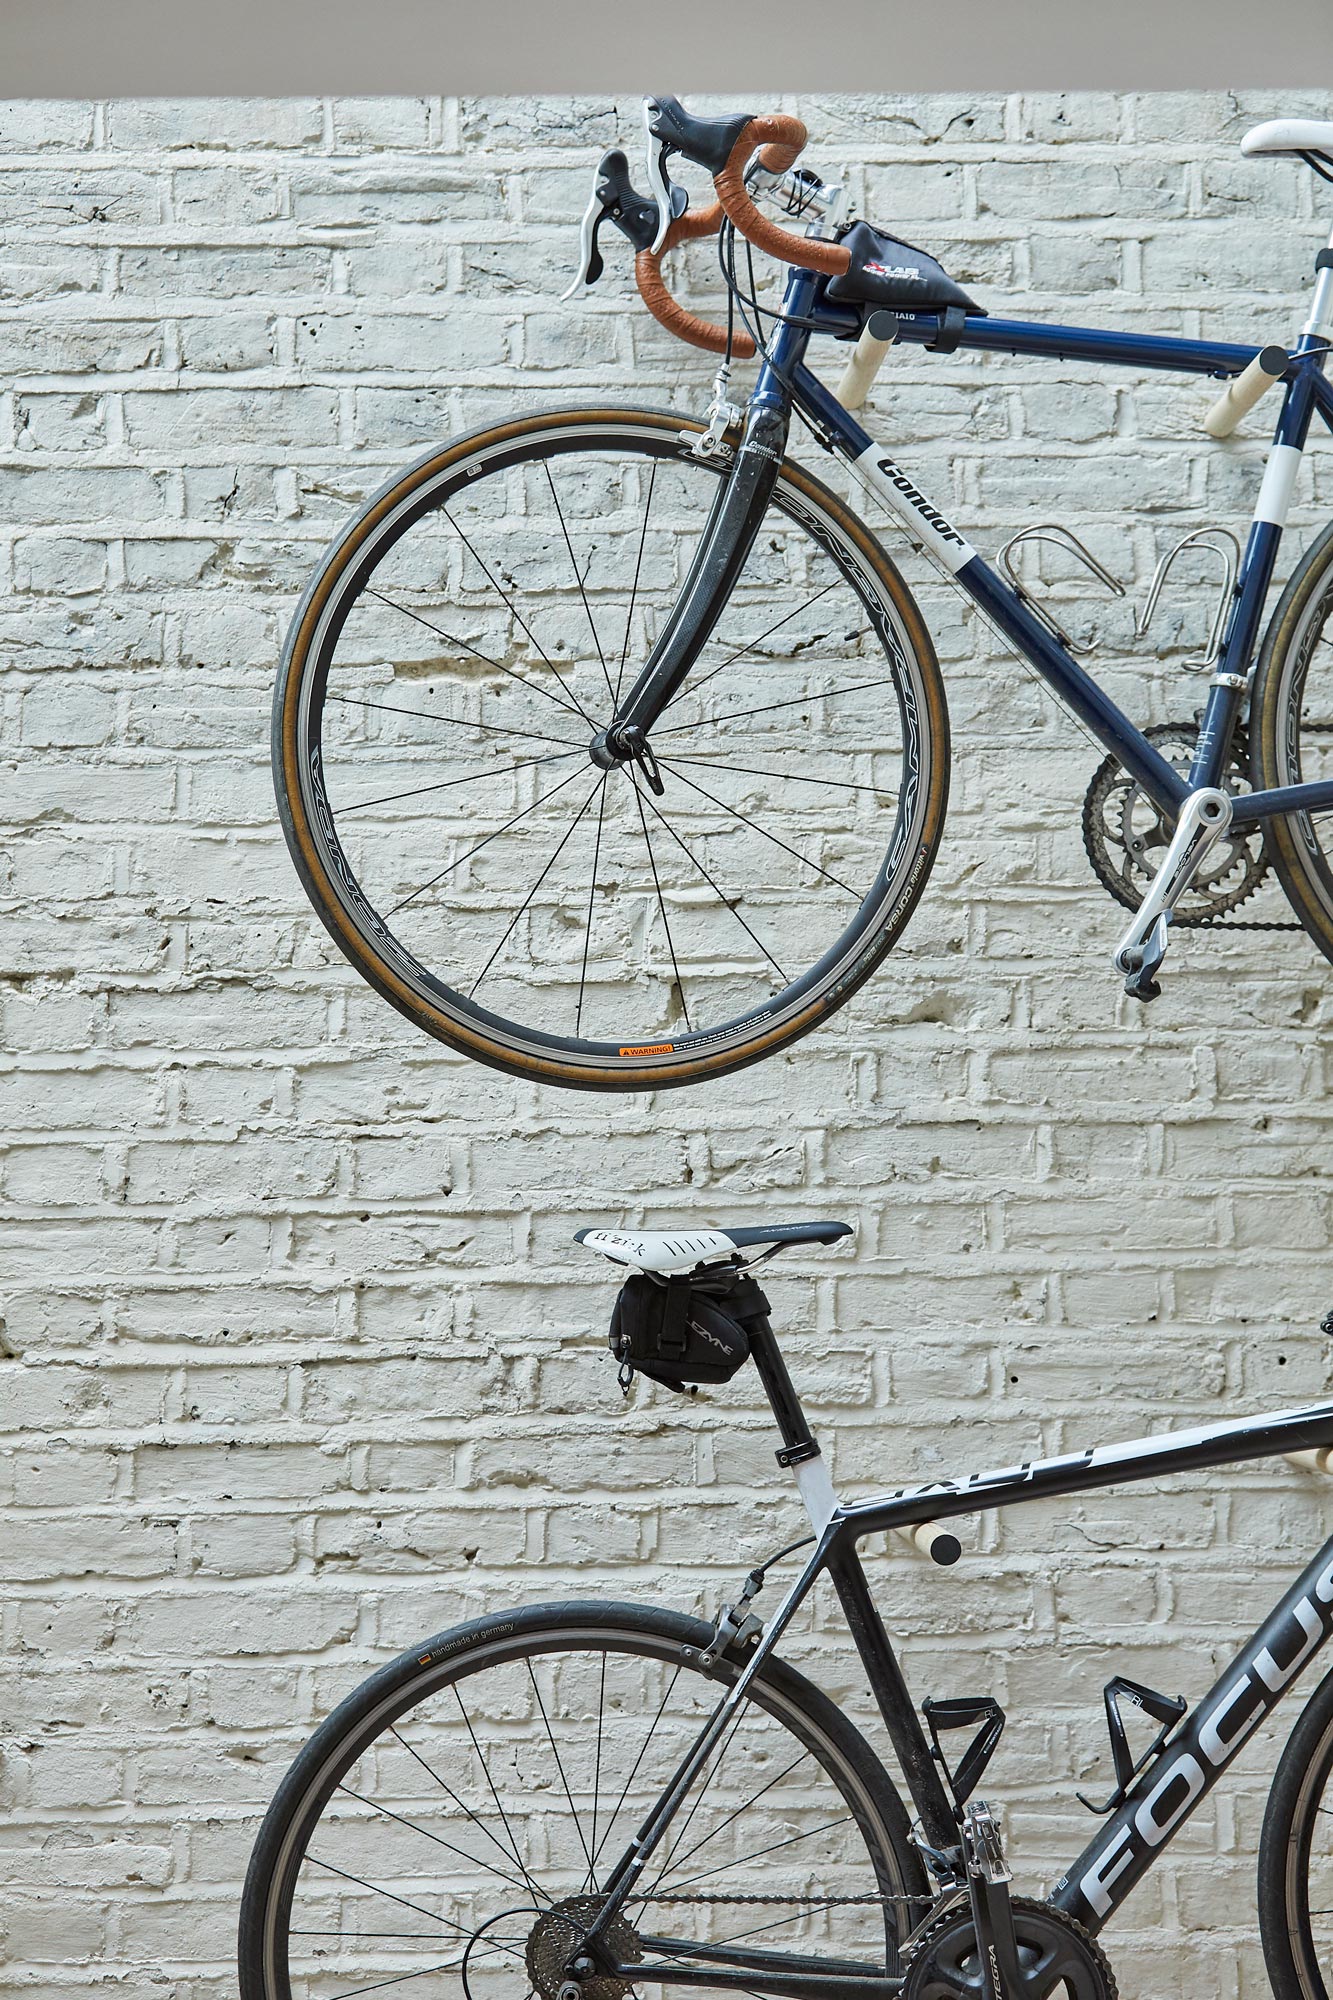 Bikes stored on painted white brick wall